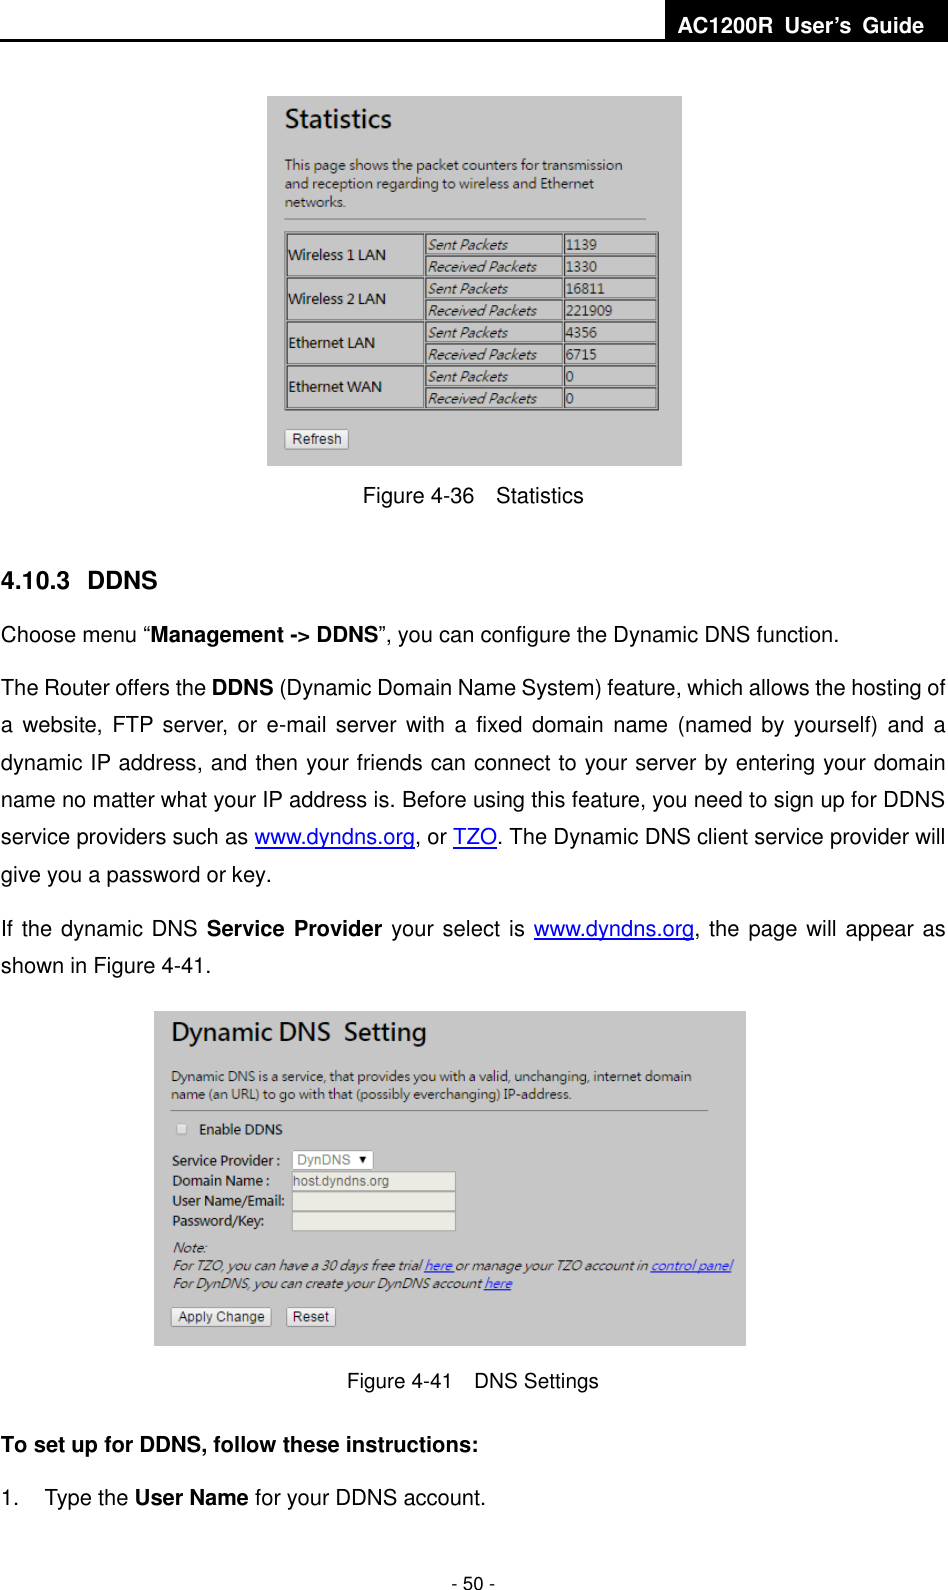  AC1200R  User’s  Guide  - 50 -  Figure 4-36  Statistics   4.10.3   DDNS Choose menu “Management -&gt; DDNS”, you can configure the Dynamic DNS function.   The Router offers the DDNS (Dynamic Domain Name System) feature, which allows the hosting of a website, FTP server, or e-mail server with  a  fixed  domain name (named by  yourself)  and  a dynamic IP address, and then your friends can connect to your server by entering your domain name no matter what your IP address is. Before using this feature, you need to sign up for DDNS service providers such as www.dyndns.org, or TZO. The Dynamic DNS client service provider will give you a password or key. If the dynamic DNS Service Provider your select is www.dyndns.org, the page will appear as shown in Figure 4-41.         Figure 4-41    DNS Settings To set up for DDNS, follow these instructions: 1.  Type the User Name for your DDNS account.   